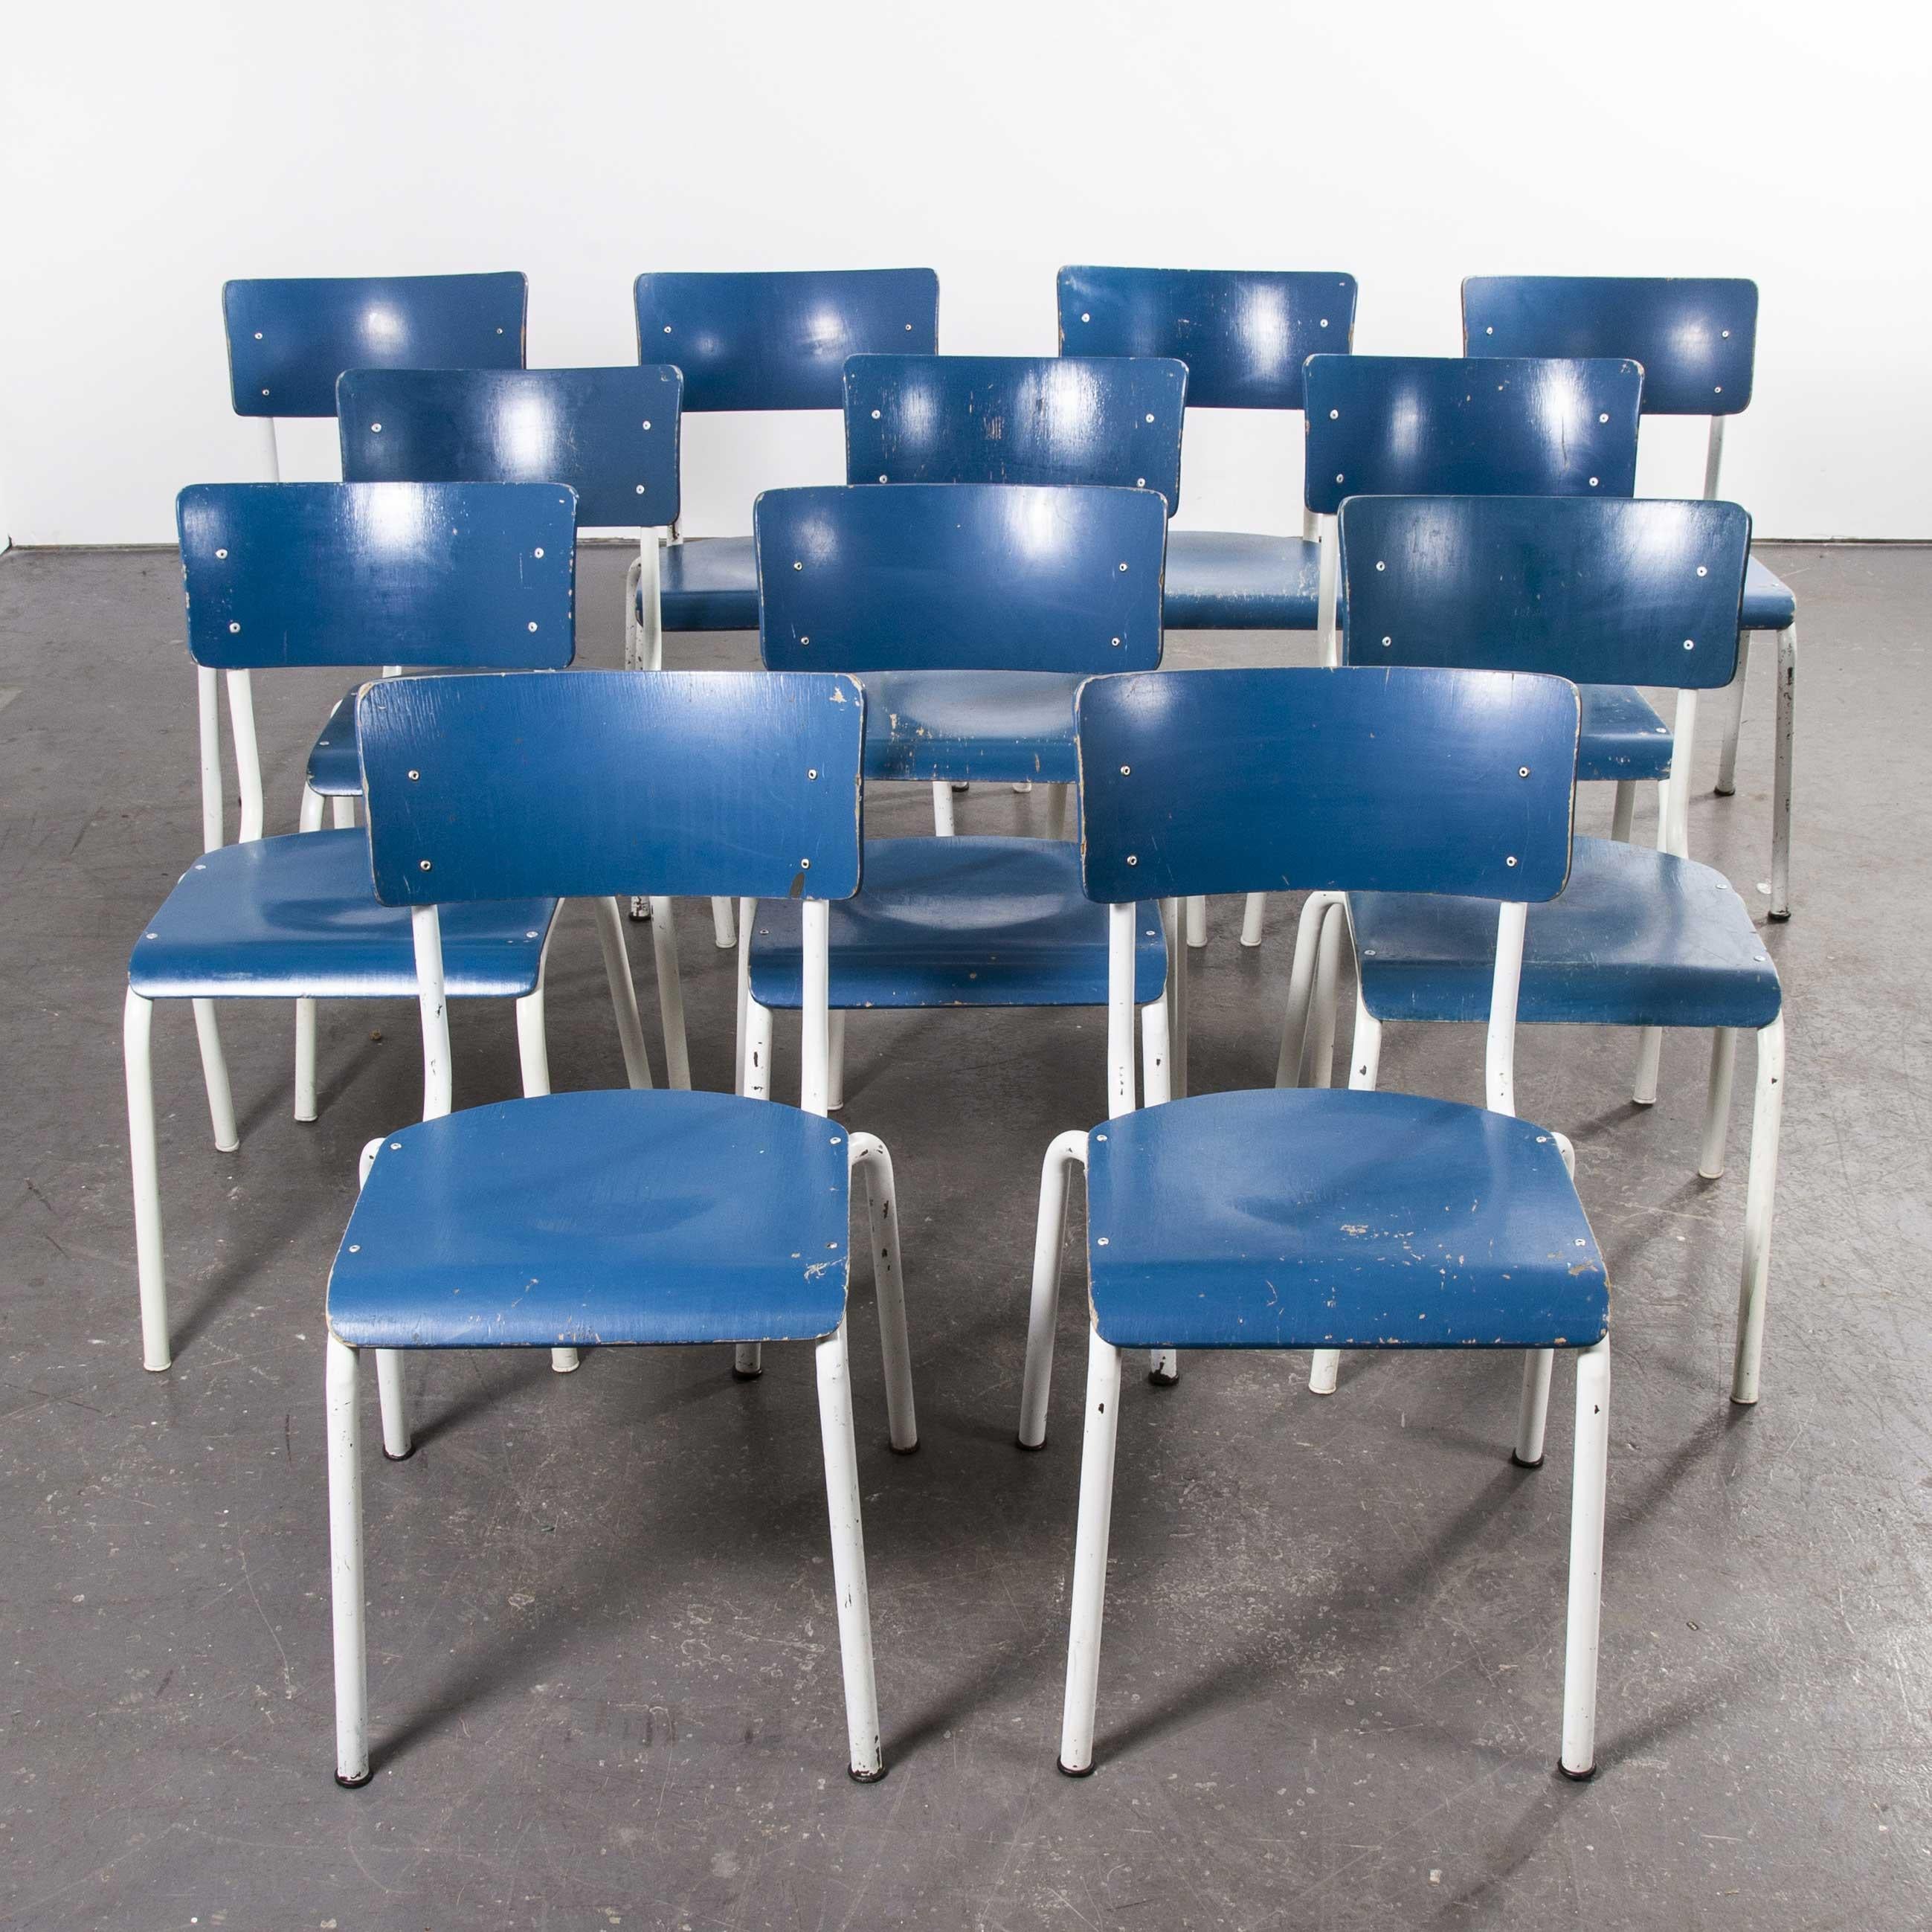 Bentwood 1970s Stacking Dining Chairs for the German Military, Blue, Set of Twelve